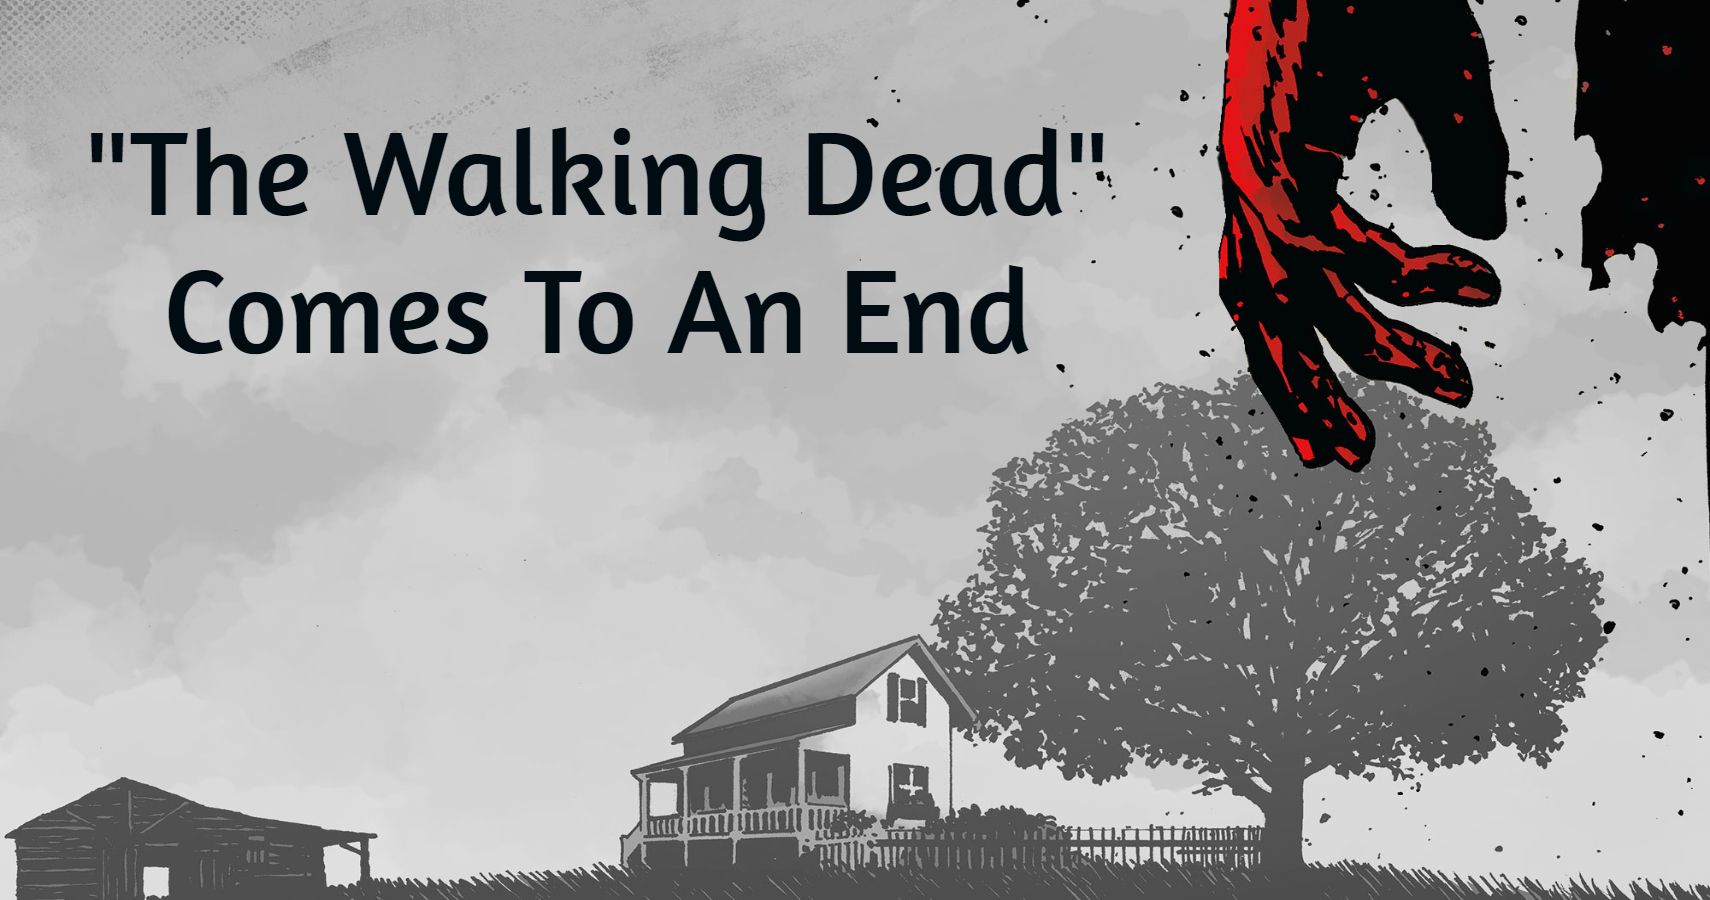 The Walking Dead Comic Book Series Comes To An Unexpected End